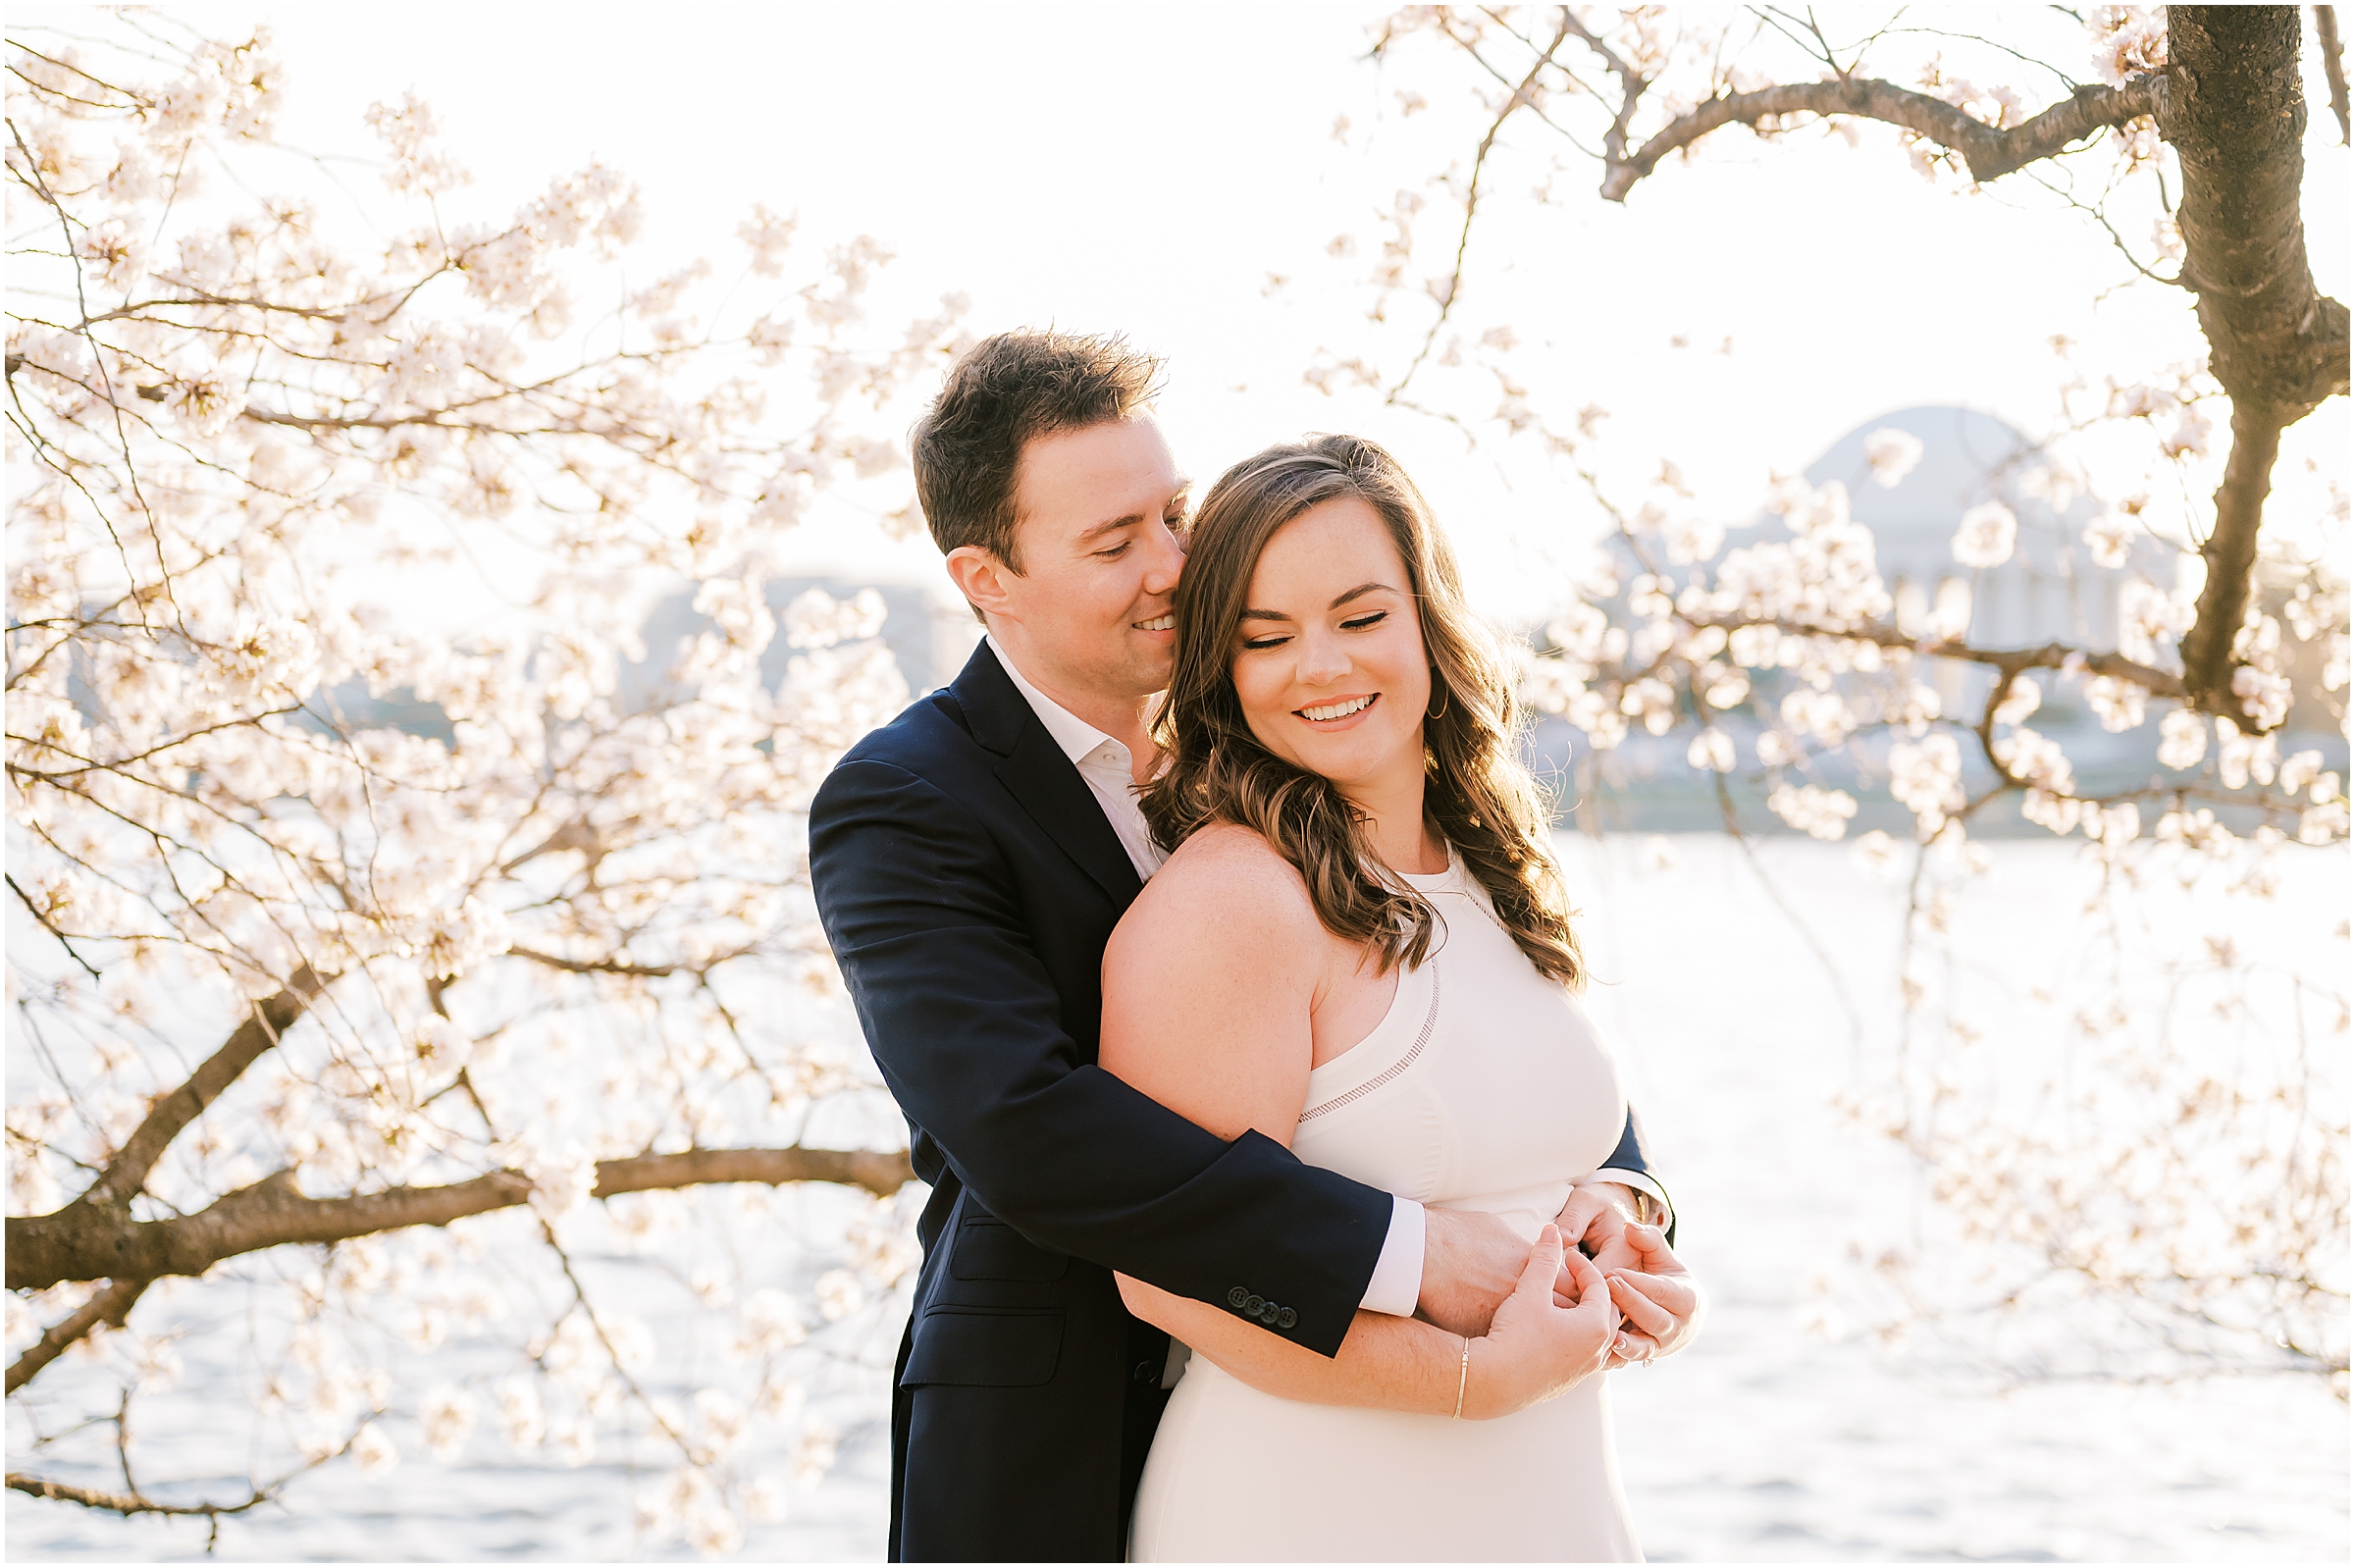 Couple embracing in front of cherry blossoms in Washington D.C.